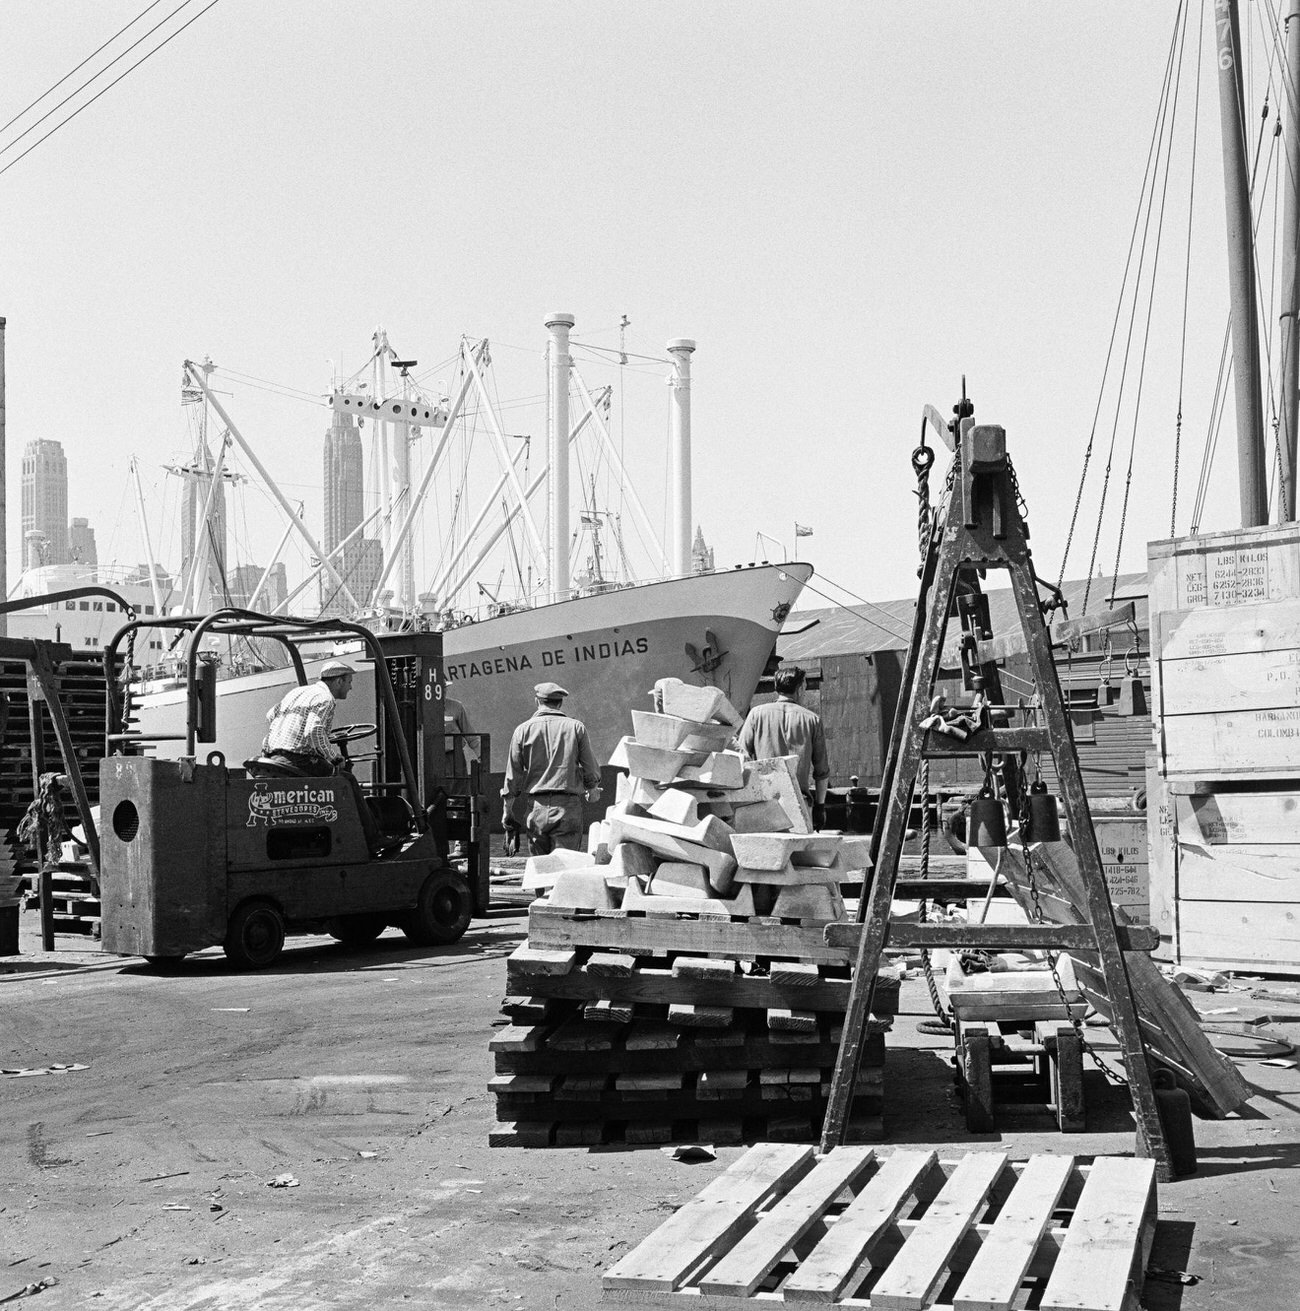 Shipworkers On The Waterfront In Brooklyn Heights, Now Called Dumbo, 1958.